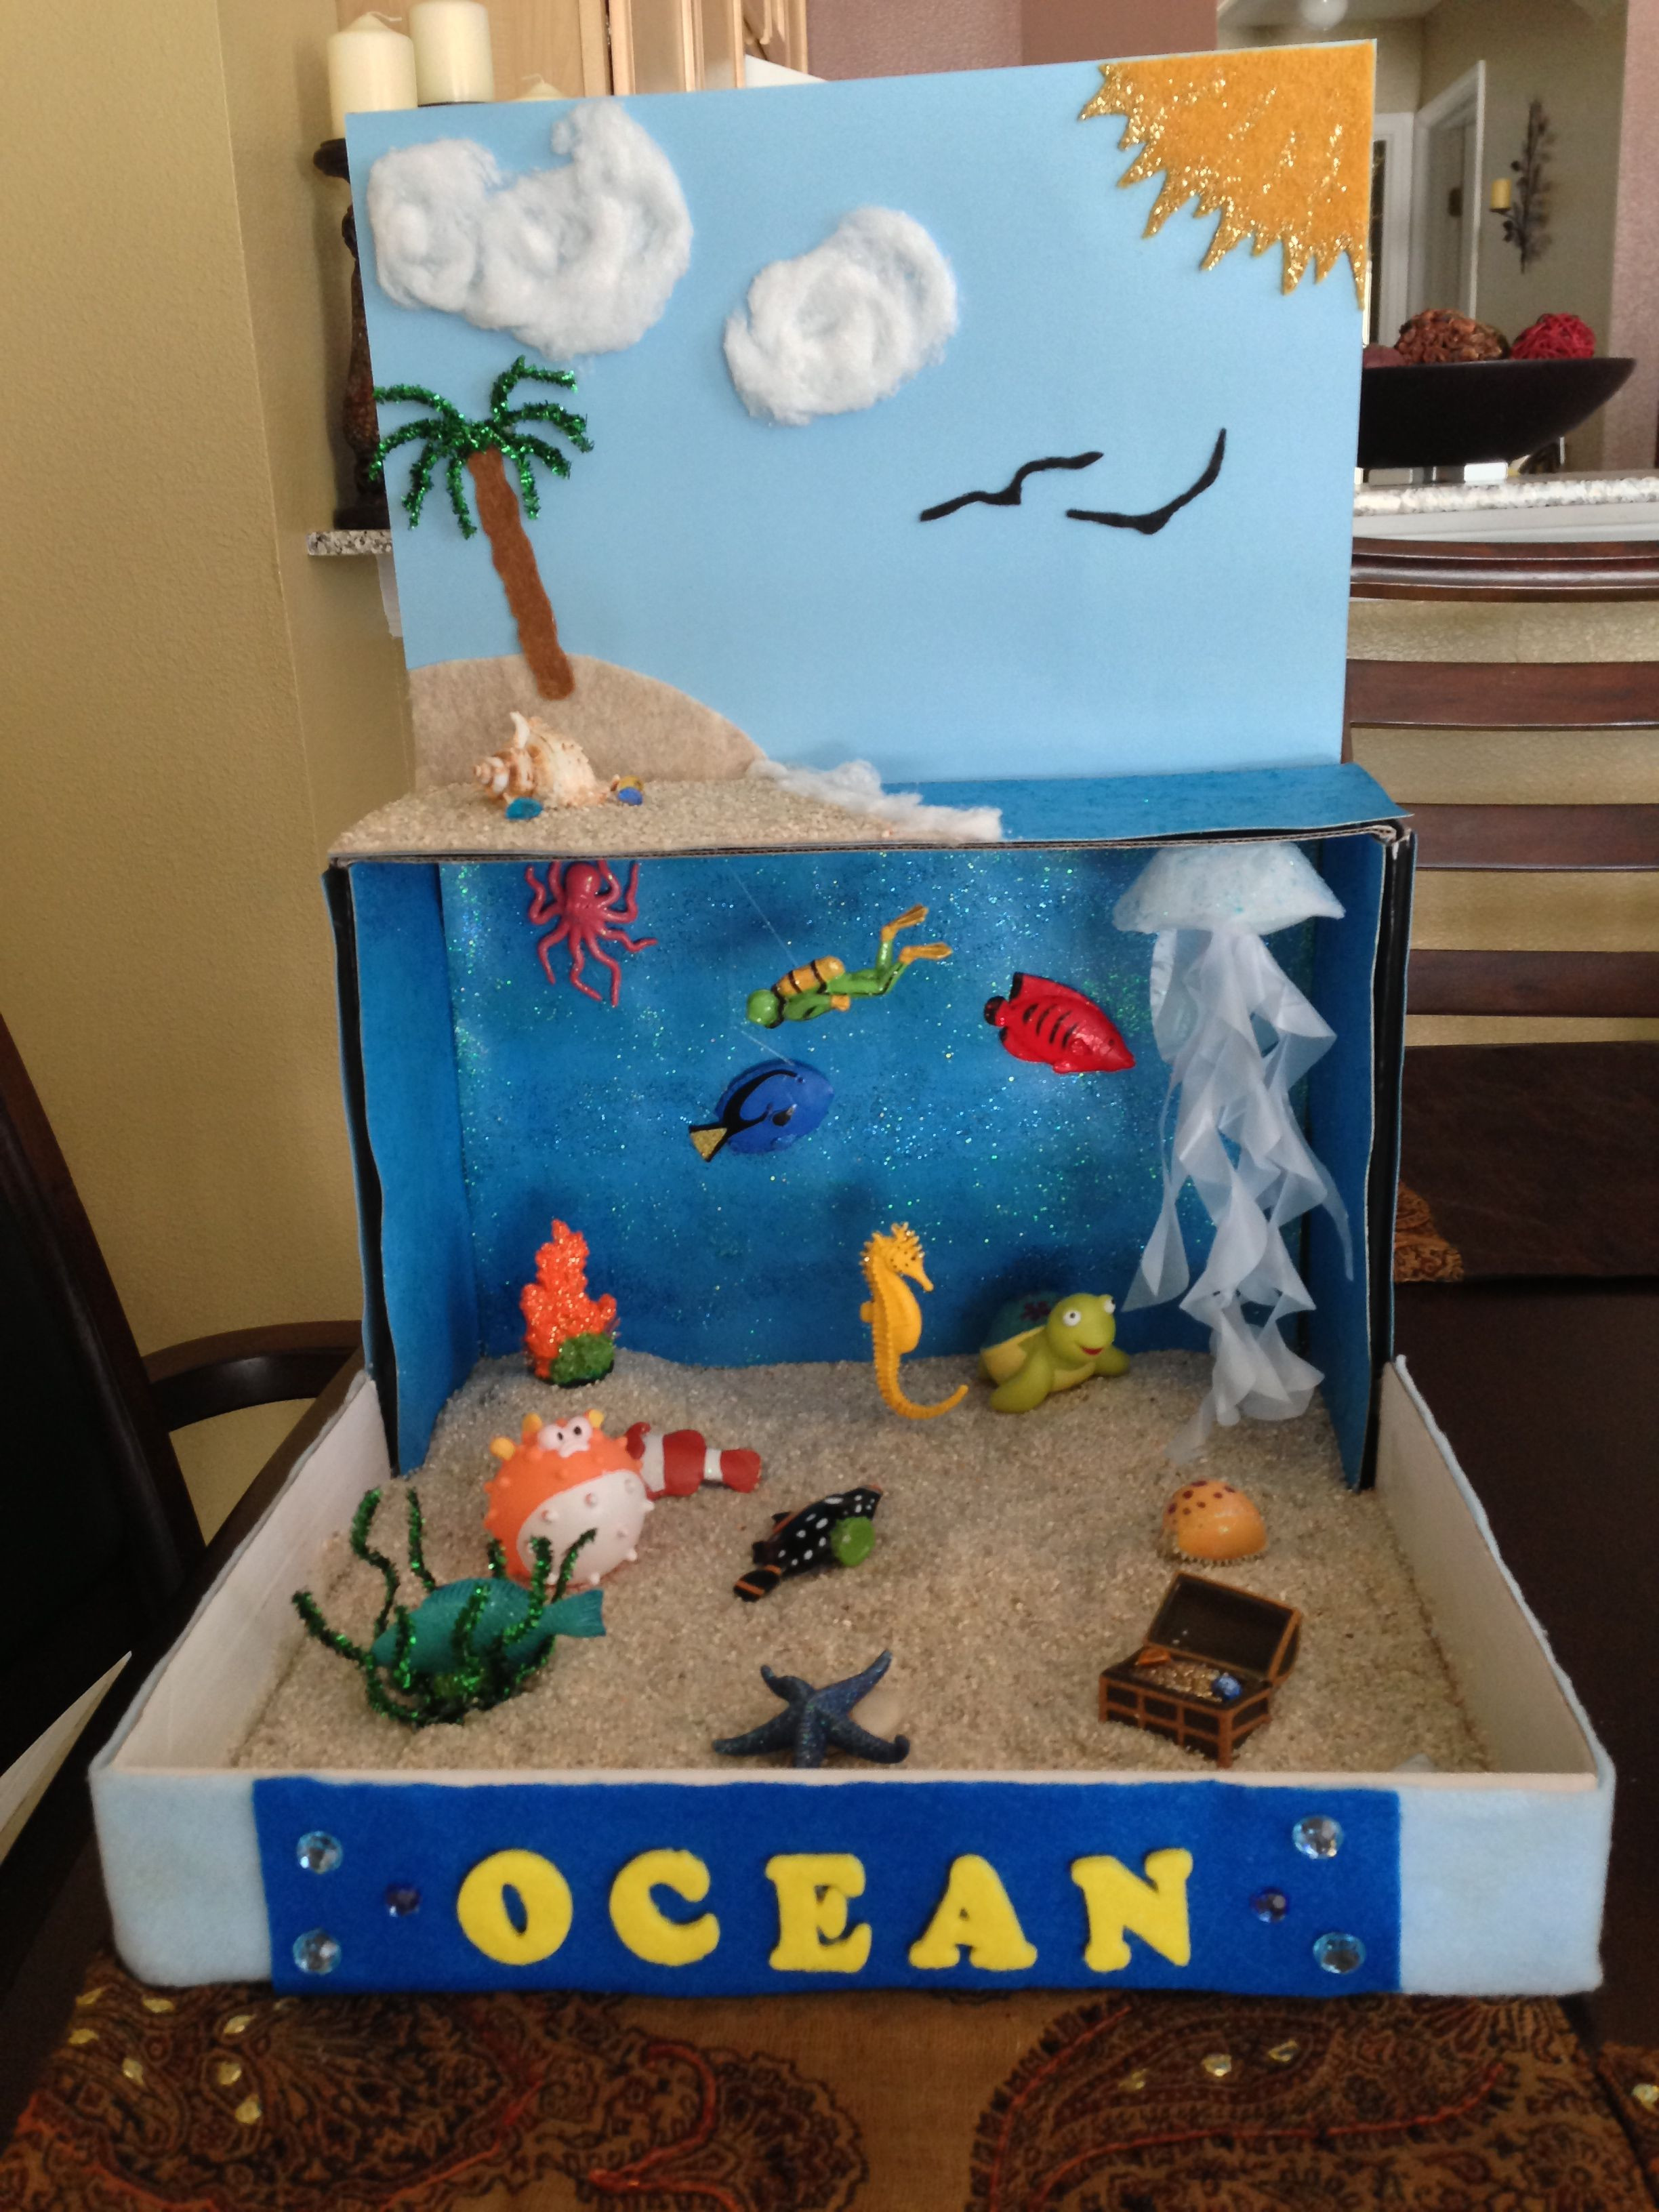 Project Ideas For Kids
 Ocean diorama for school project Idea for Henry 2nd